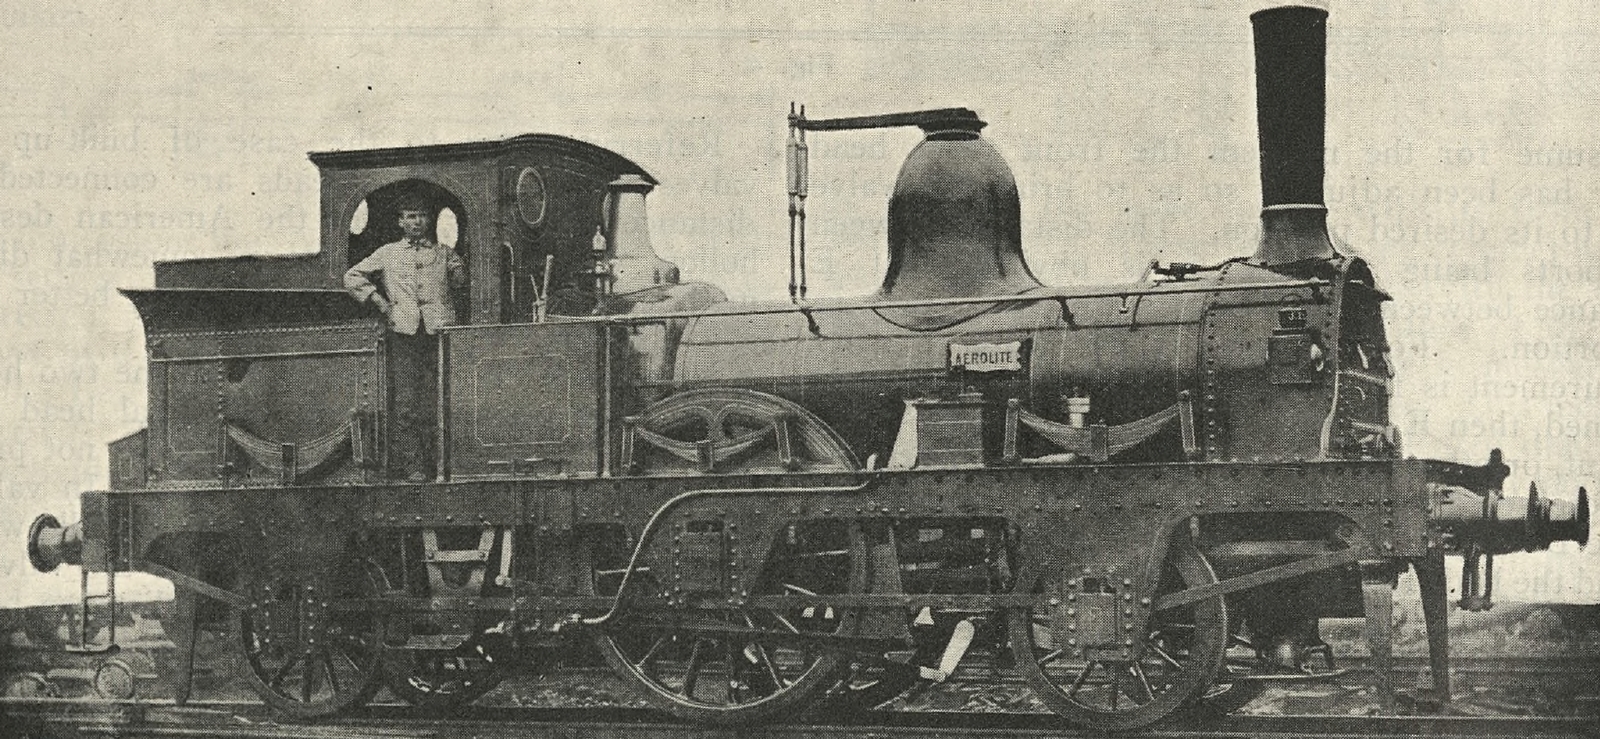 The second Aerolite from 1869